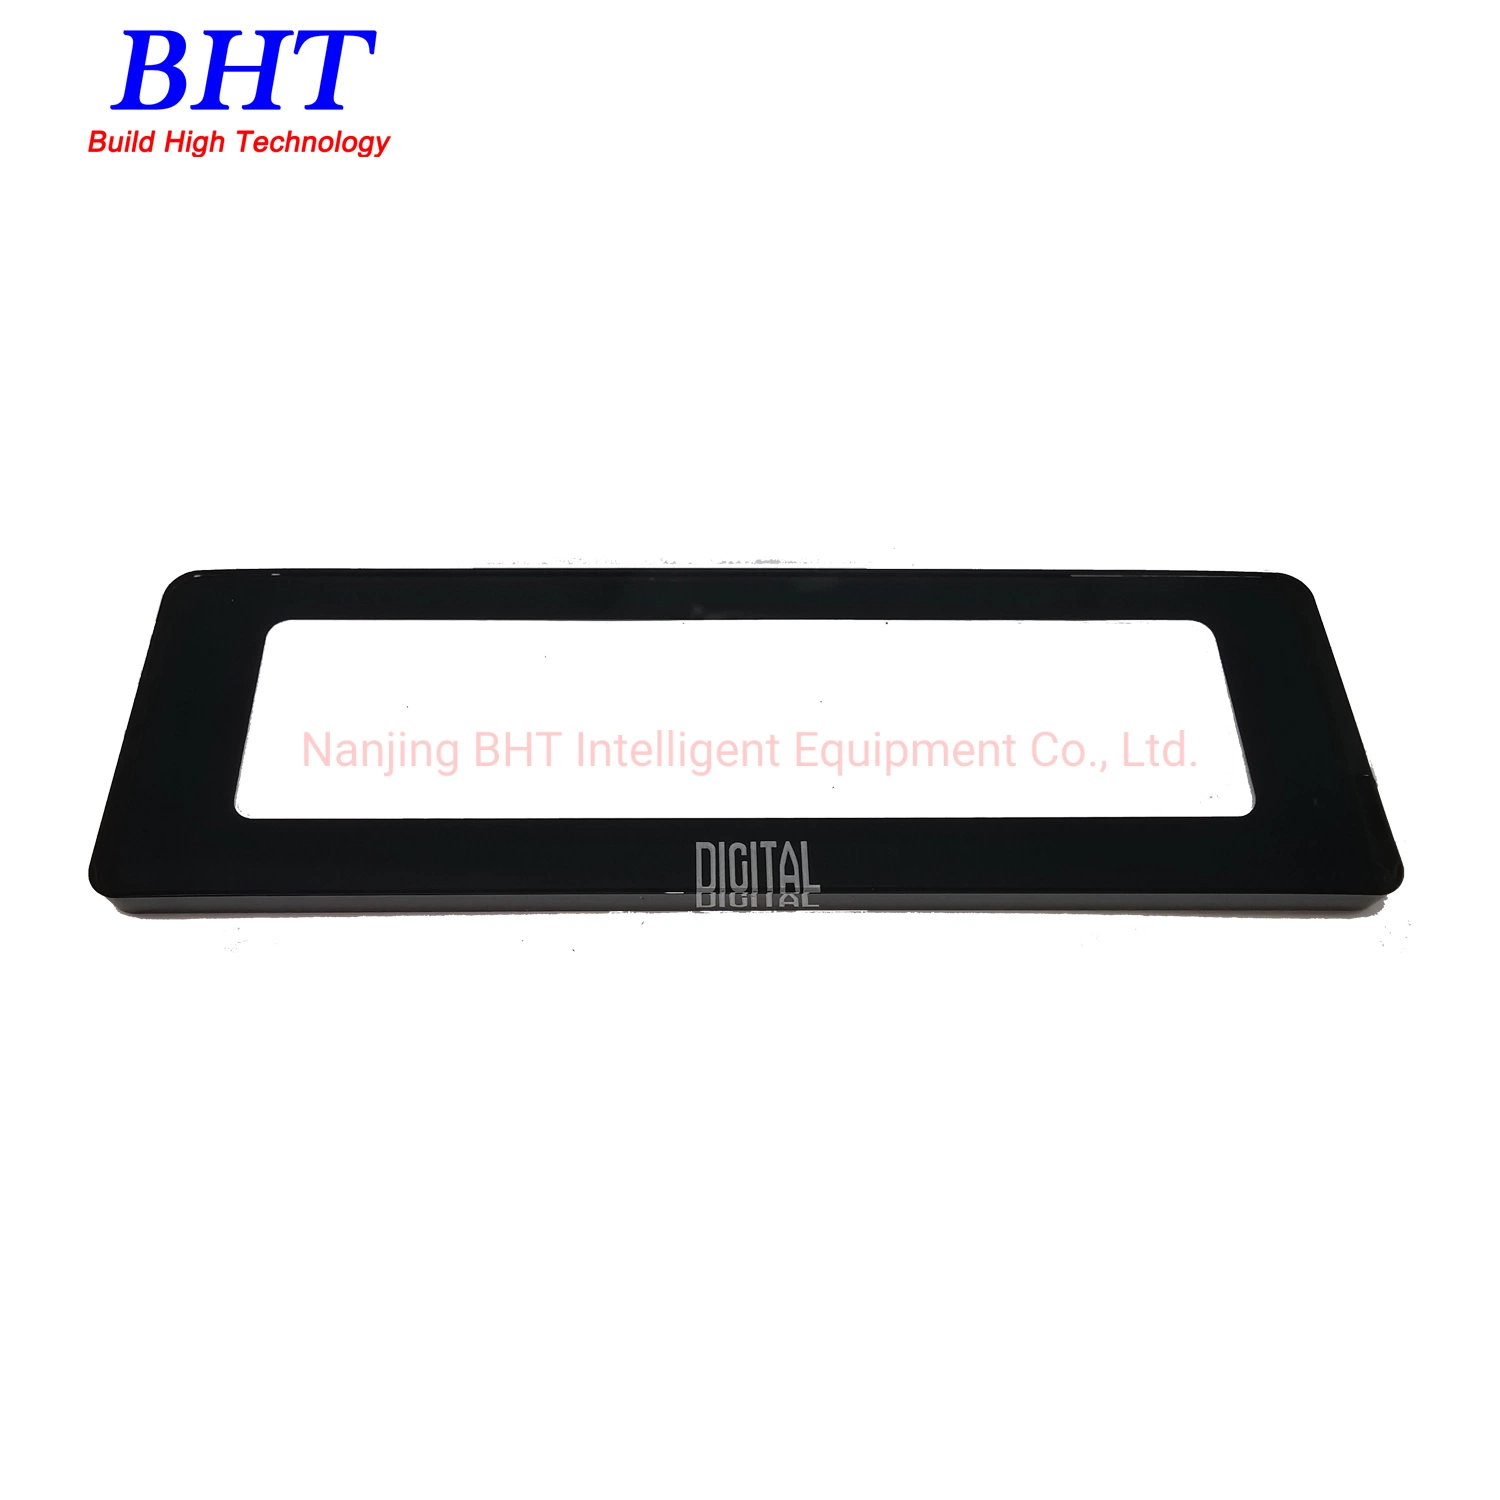 OEM Injection Molding Parts of Telephone Screen Cover, Smart Phone/ LCD Display /Watch Mobile Phone /Cell Mobile Phone /Mobile Phone Cover